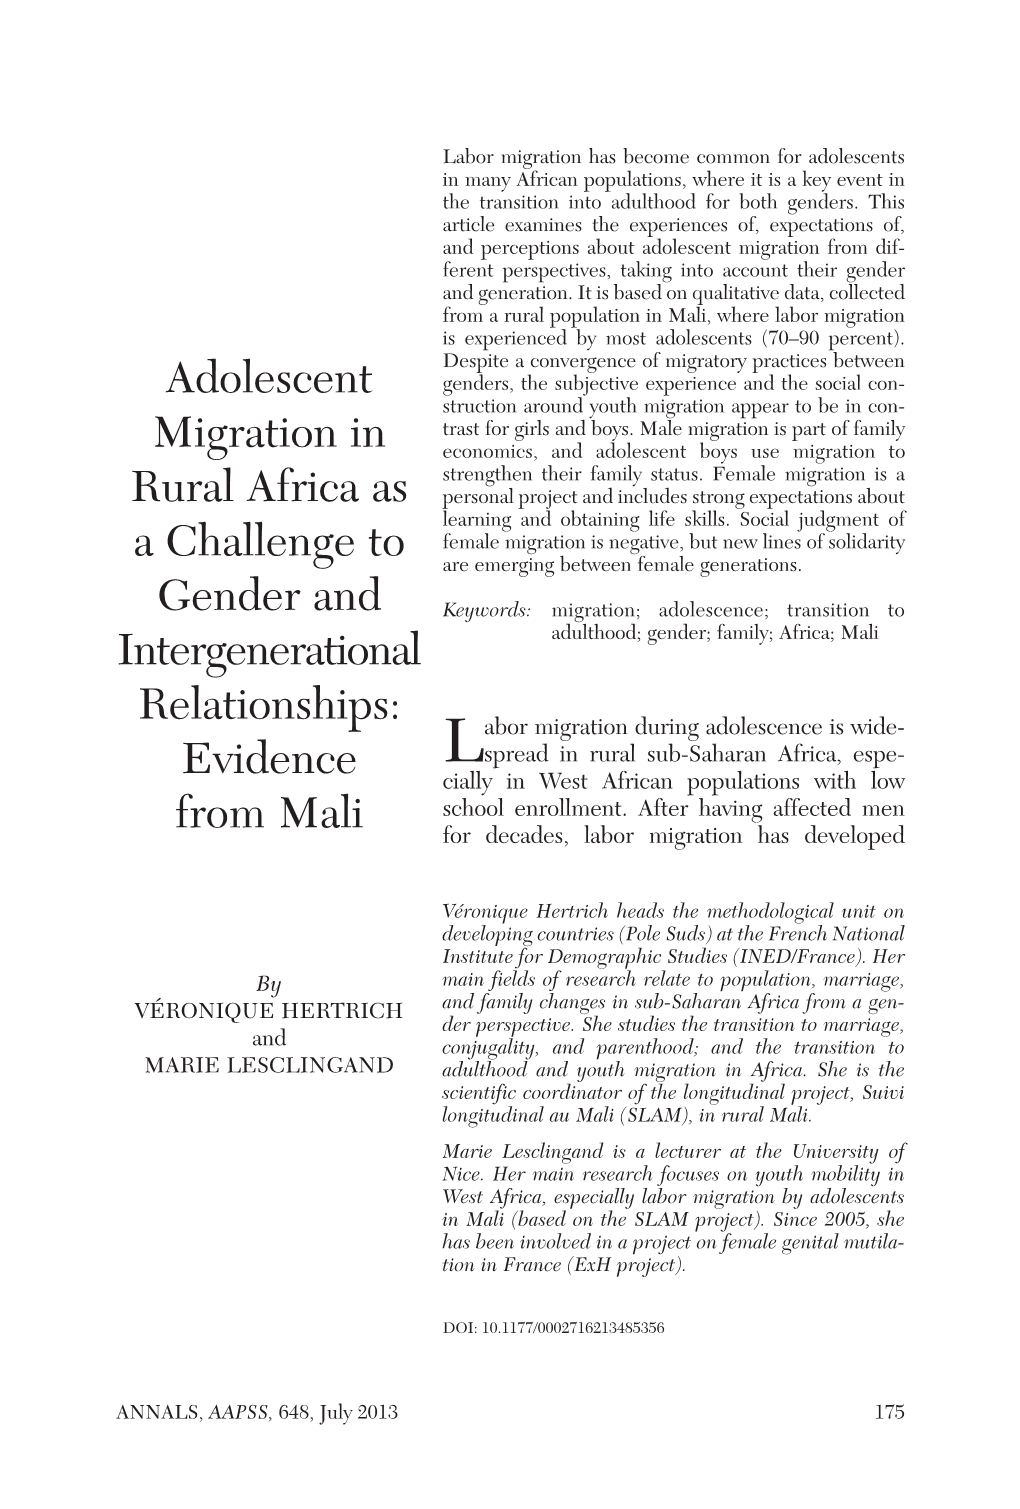 Adolescent Migration in Rural Africa As a Challenge to Gender And